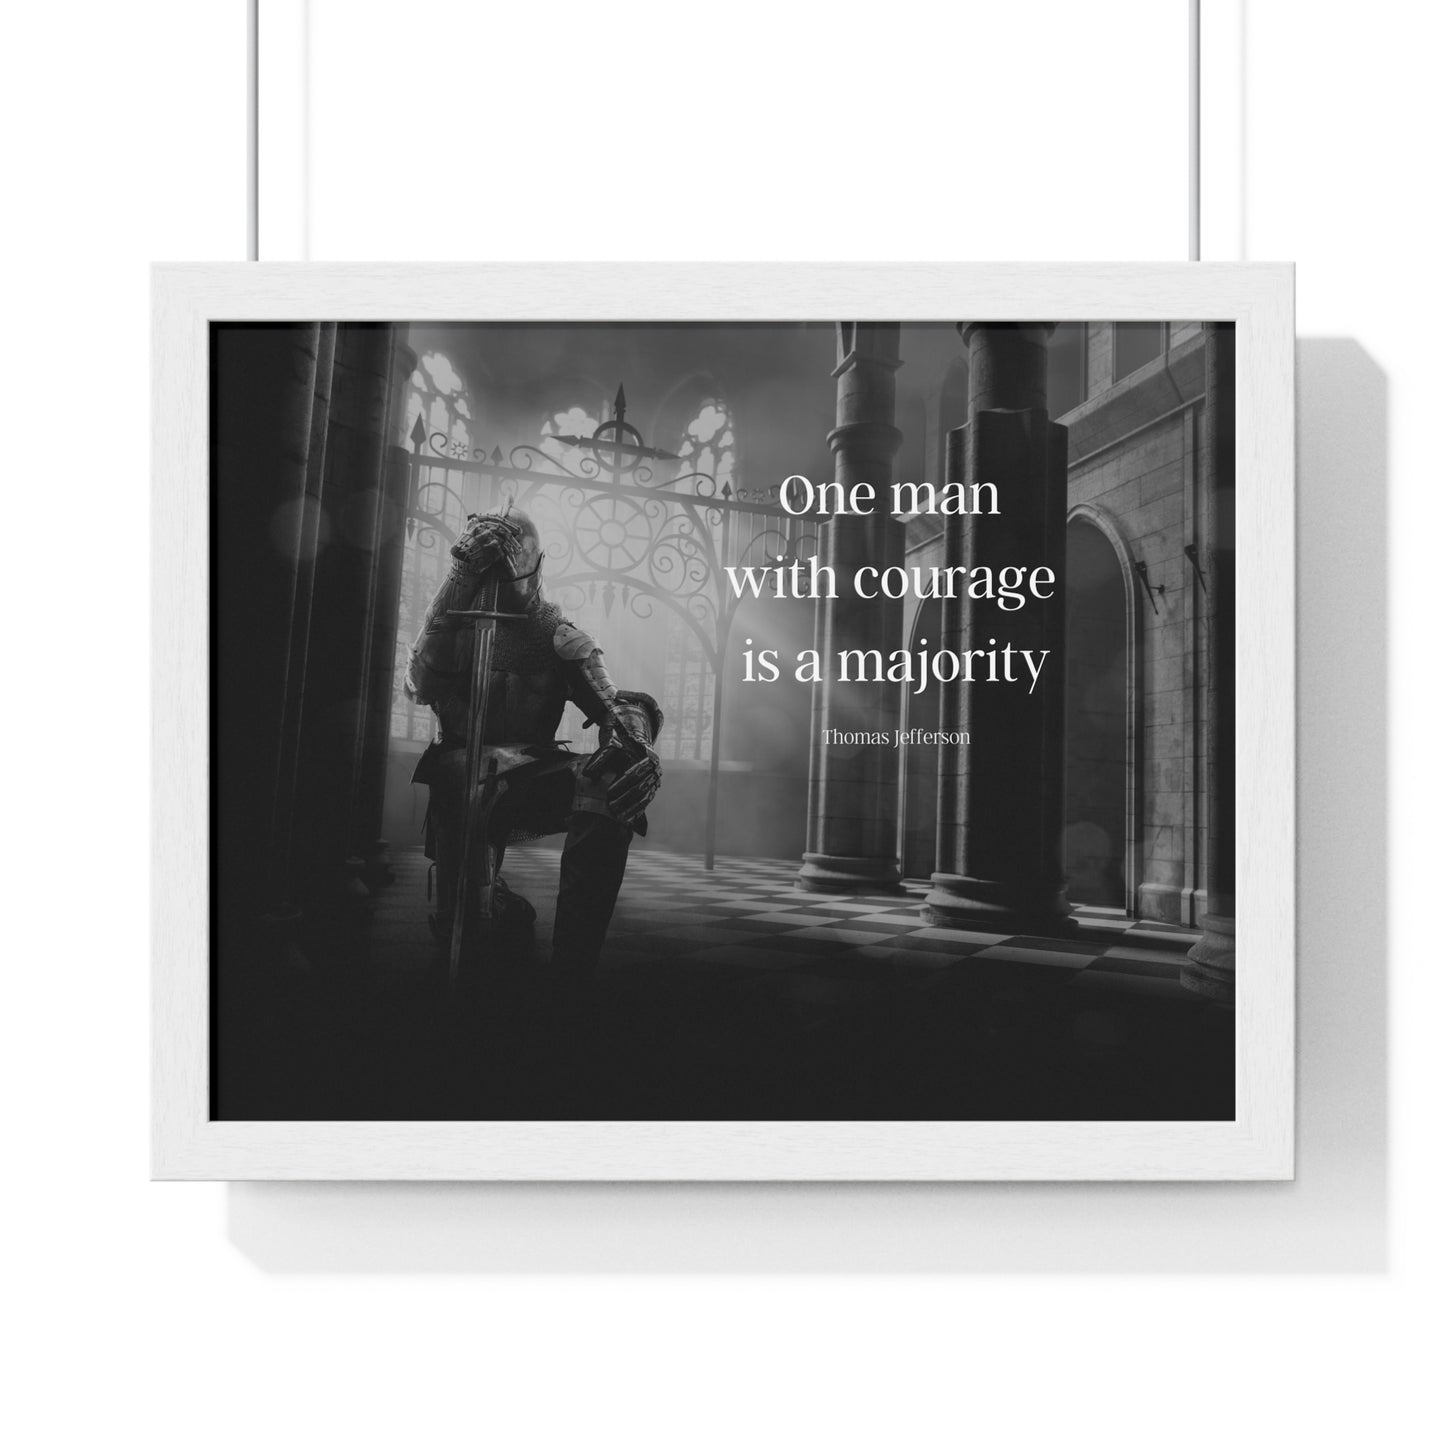 Thomas Jefferson Quote 4, Poster Art, Horizontal Print, Knight, Courage 3rd President of the United States, American Patriots, AI Art, Political Art, Presidential Quotes, Inspirational Quotes